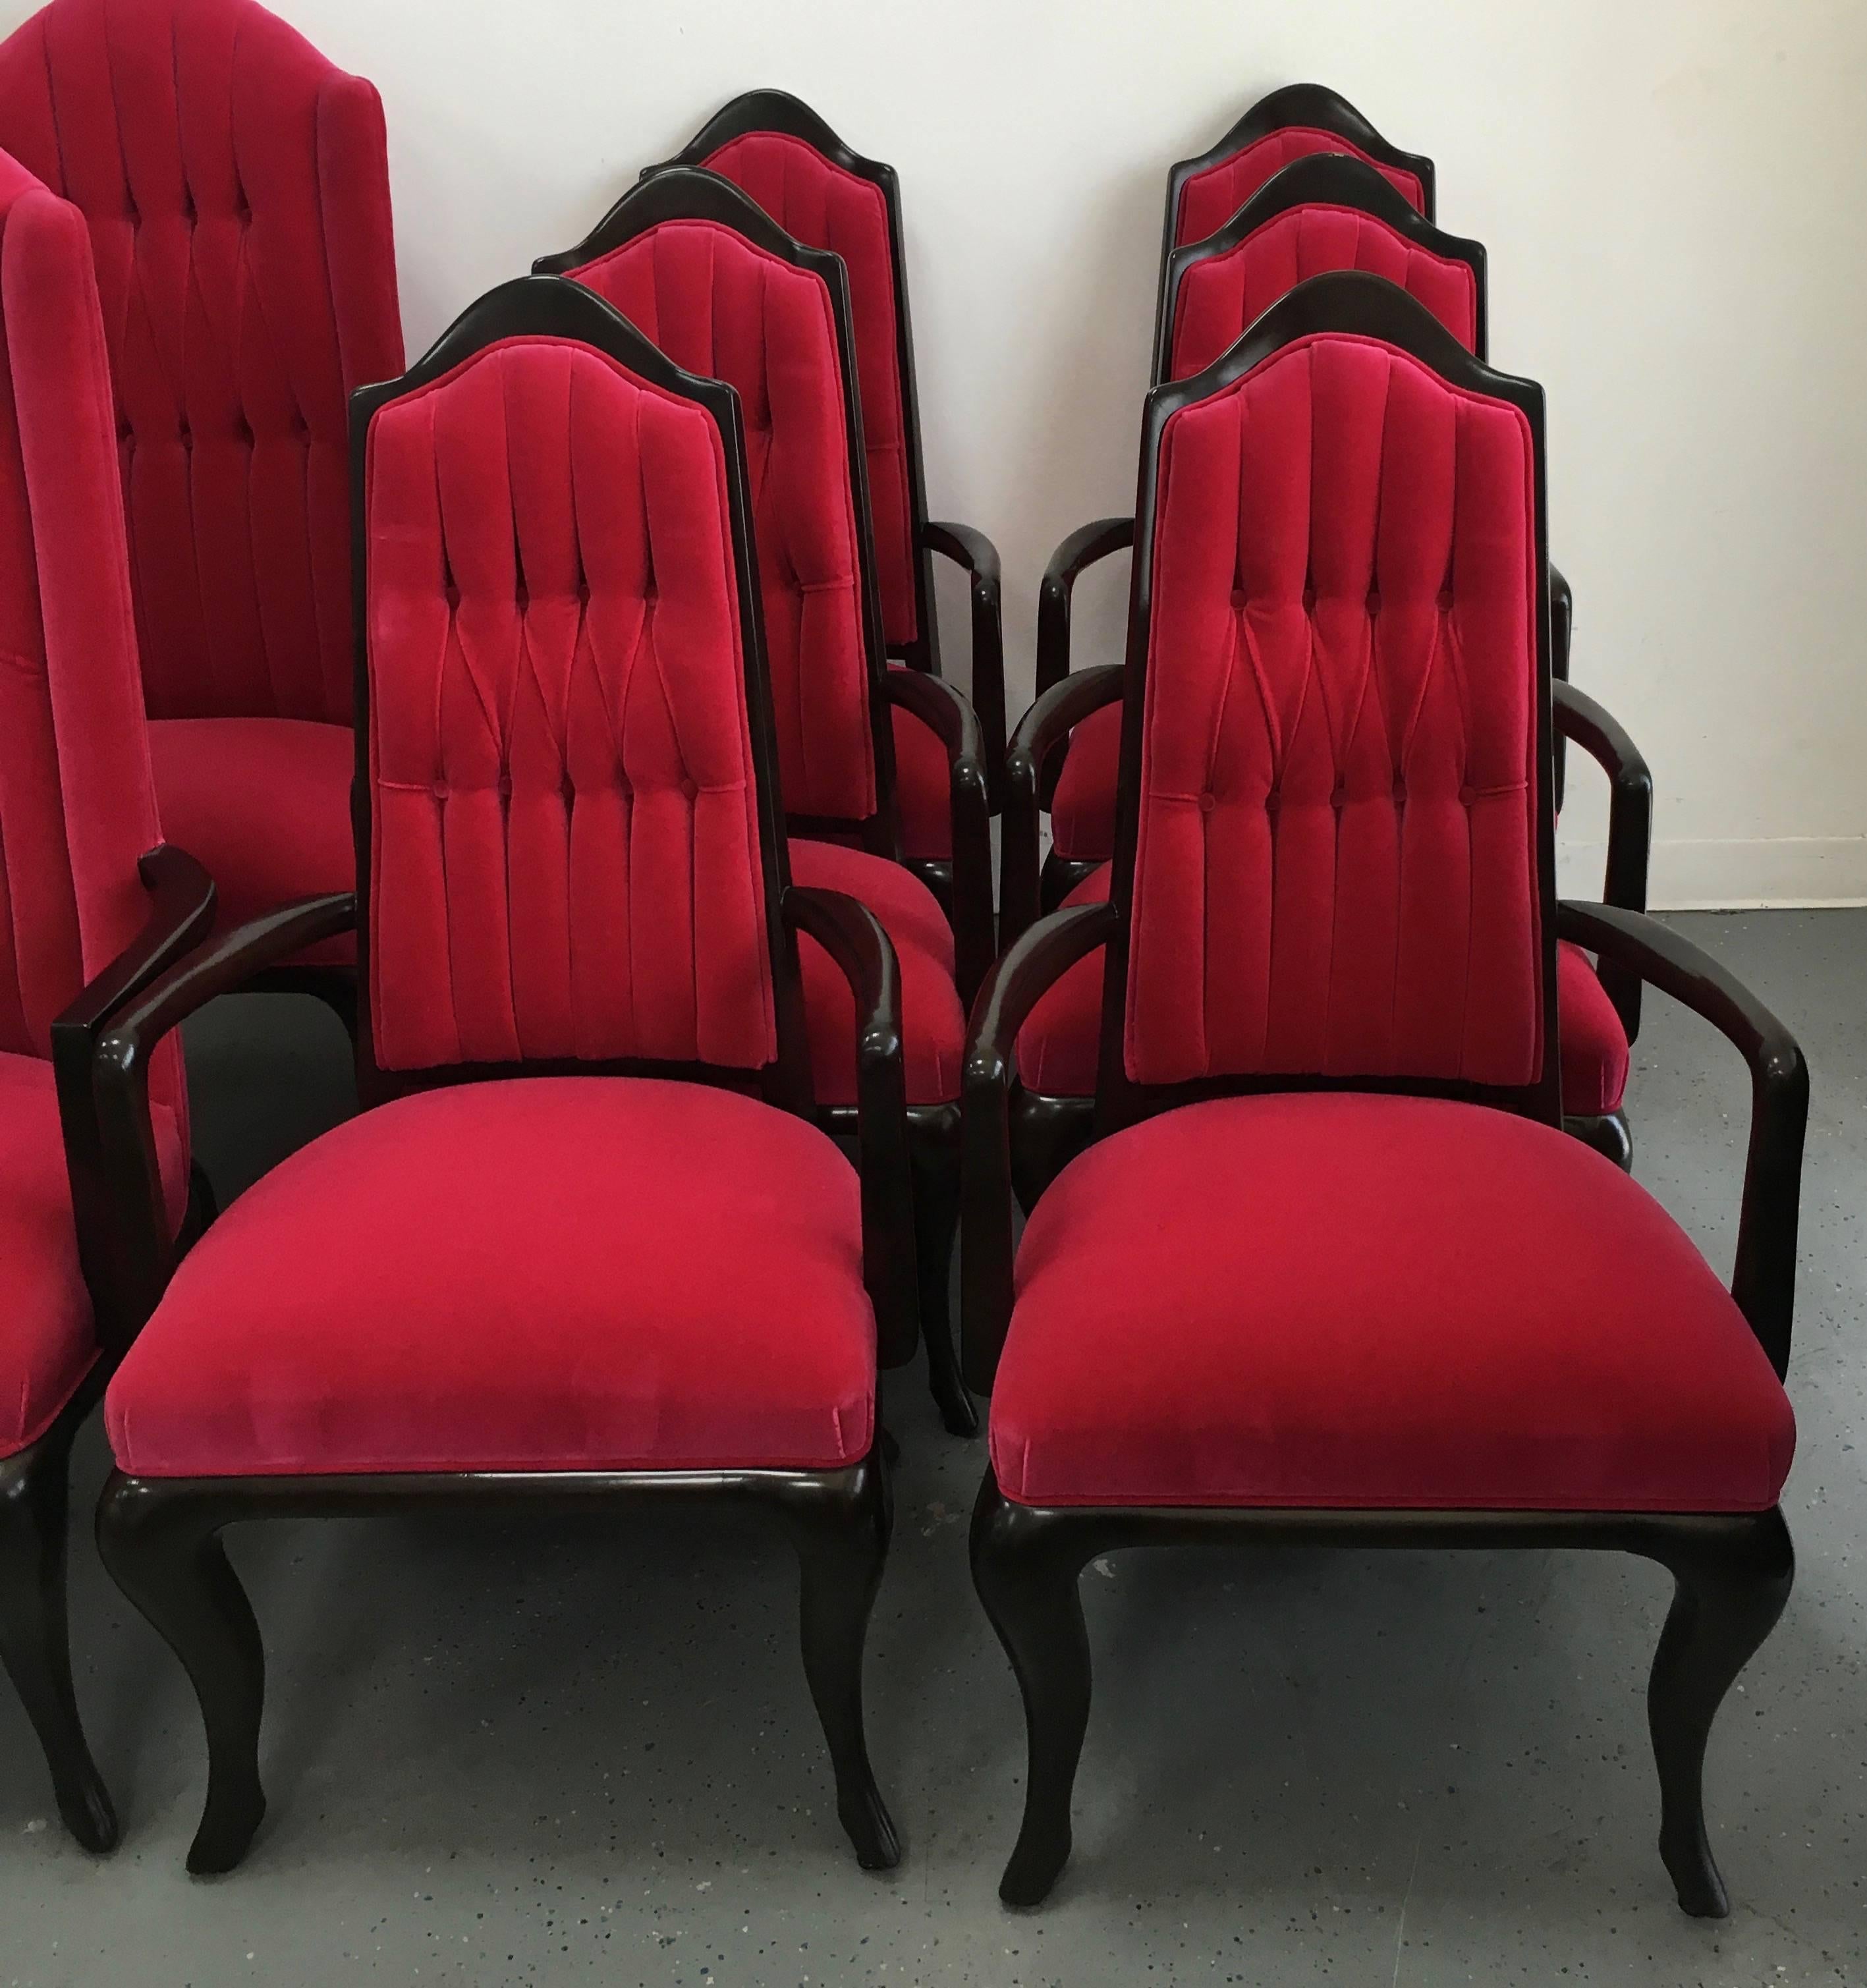 Set of eight dining chairs consists of two captains and four dining chairs, beautiful and very comfortable chairs suited perfectly for the dining room or conference room. Solid mahogany with a satin finish, stunning, for the dinner guests you want